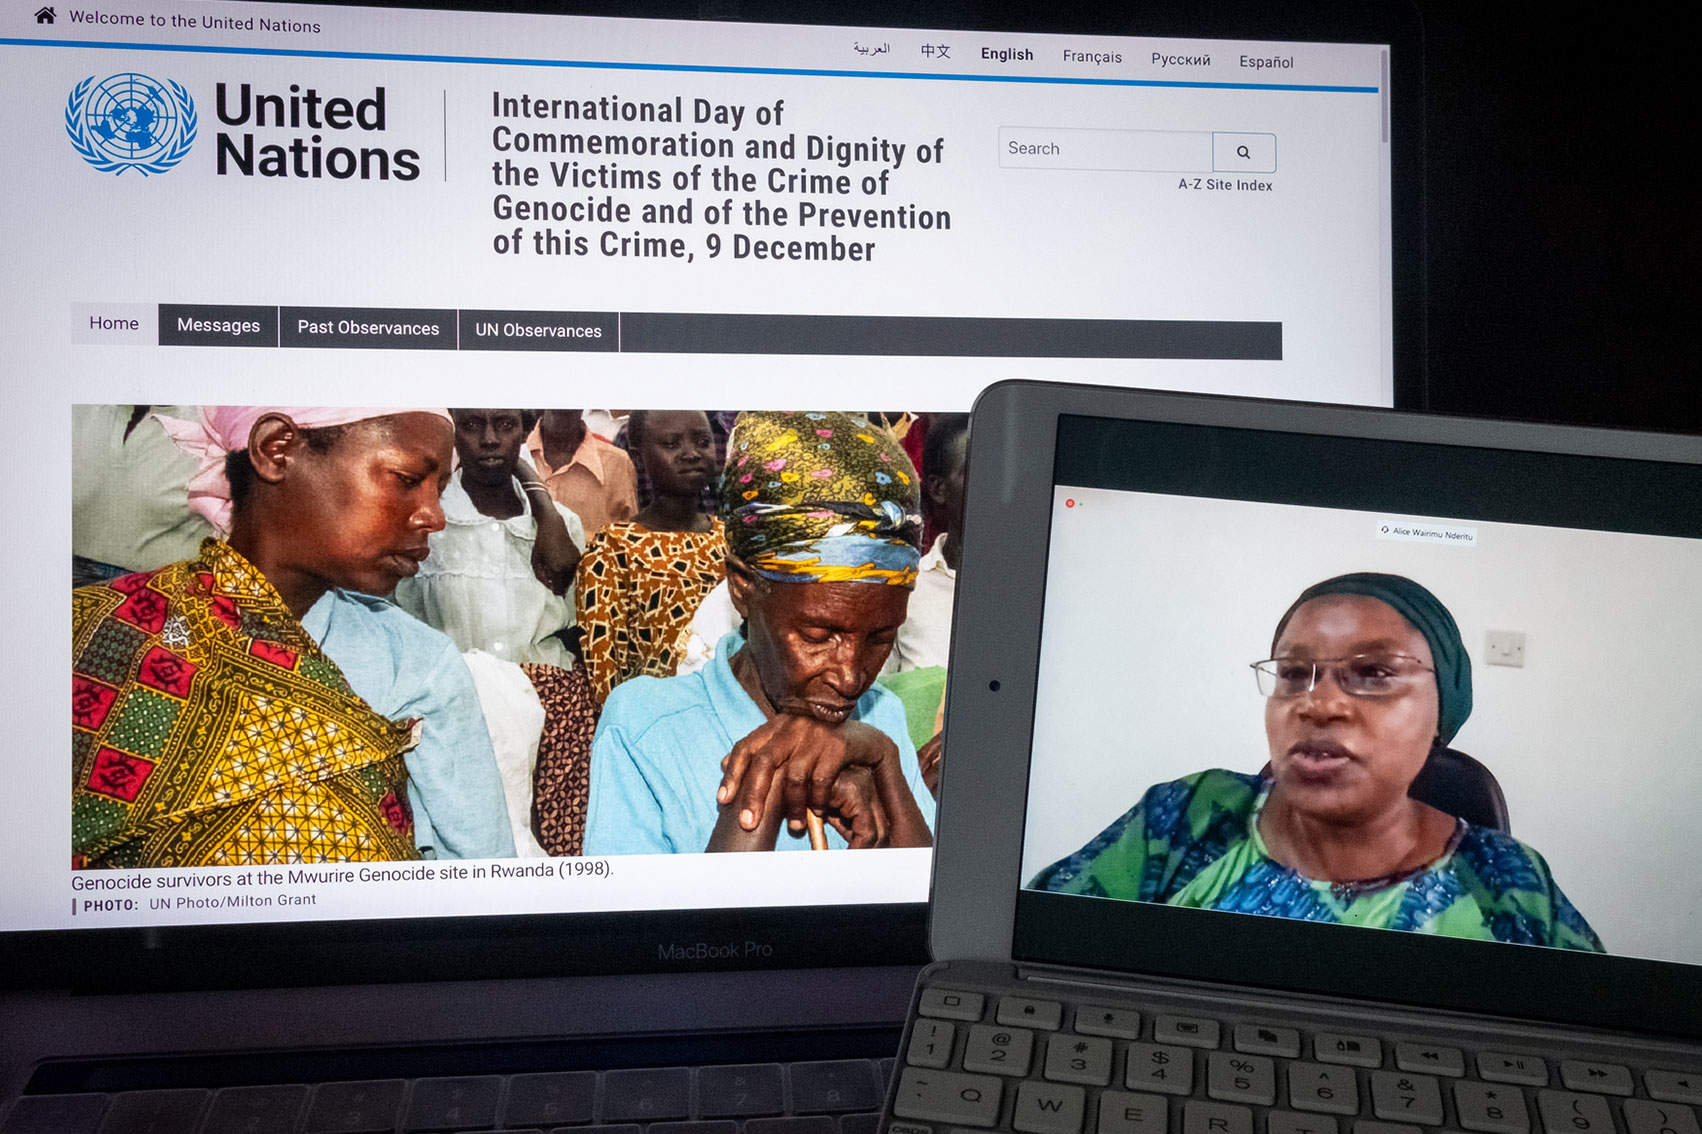 Alice Nderitu is seen live cast on a computer screen while another screen shows a UN webpage on the International Day of Commemoration and Dignity of the Victims of the Crime of Genocide and the Prevention of this Crime.